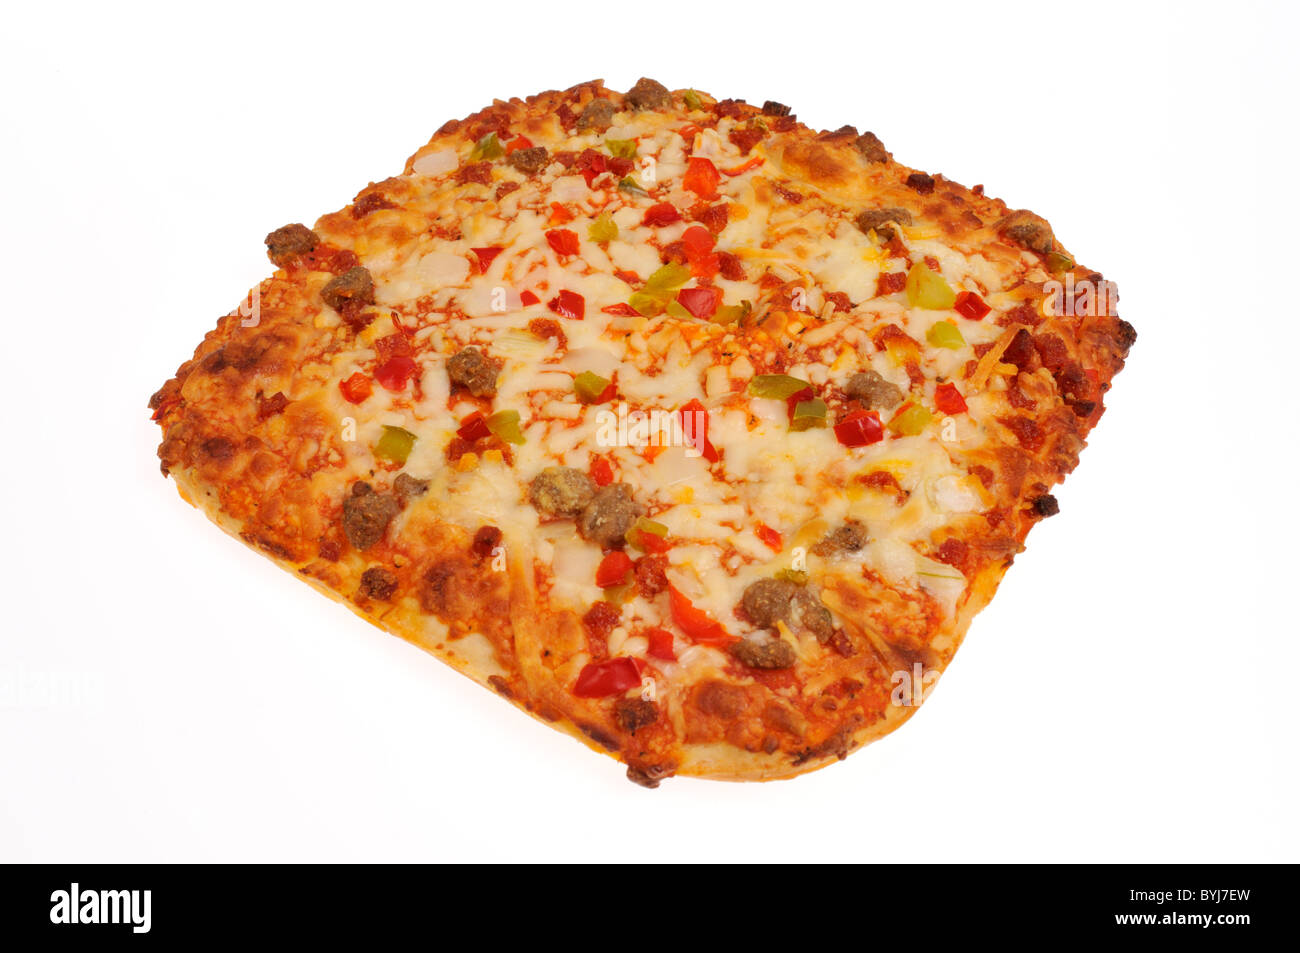 Cooked whole square pizza with red & green peppers and meat on white background, cutout. Stock Photo